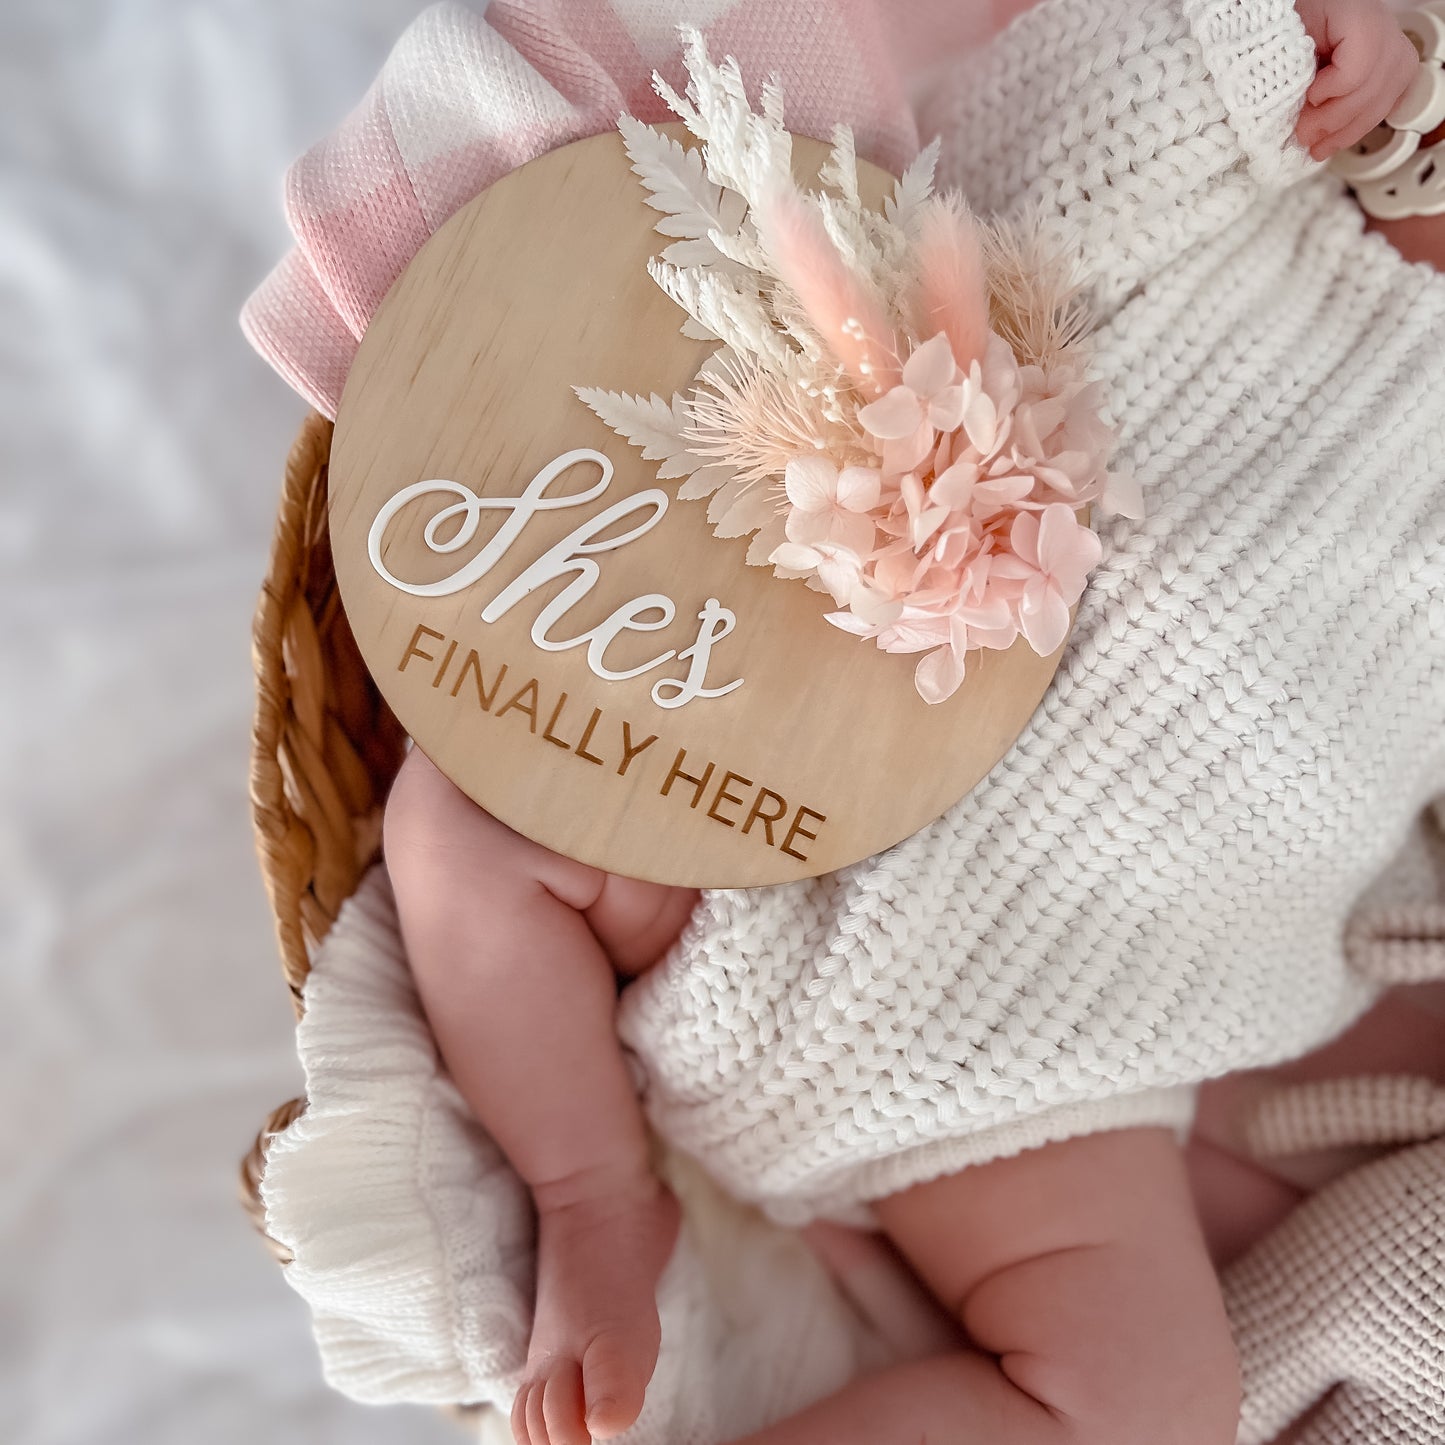 She/He/They're finally here - Birth Announcement Plaque w/ dried flowers